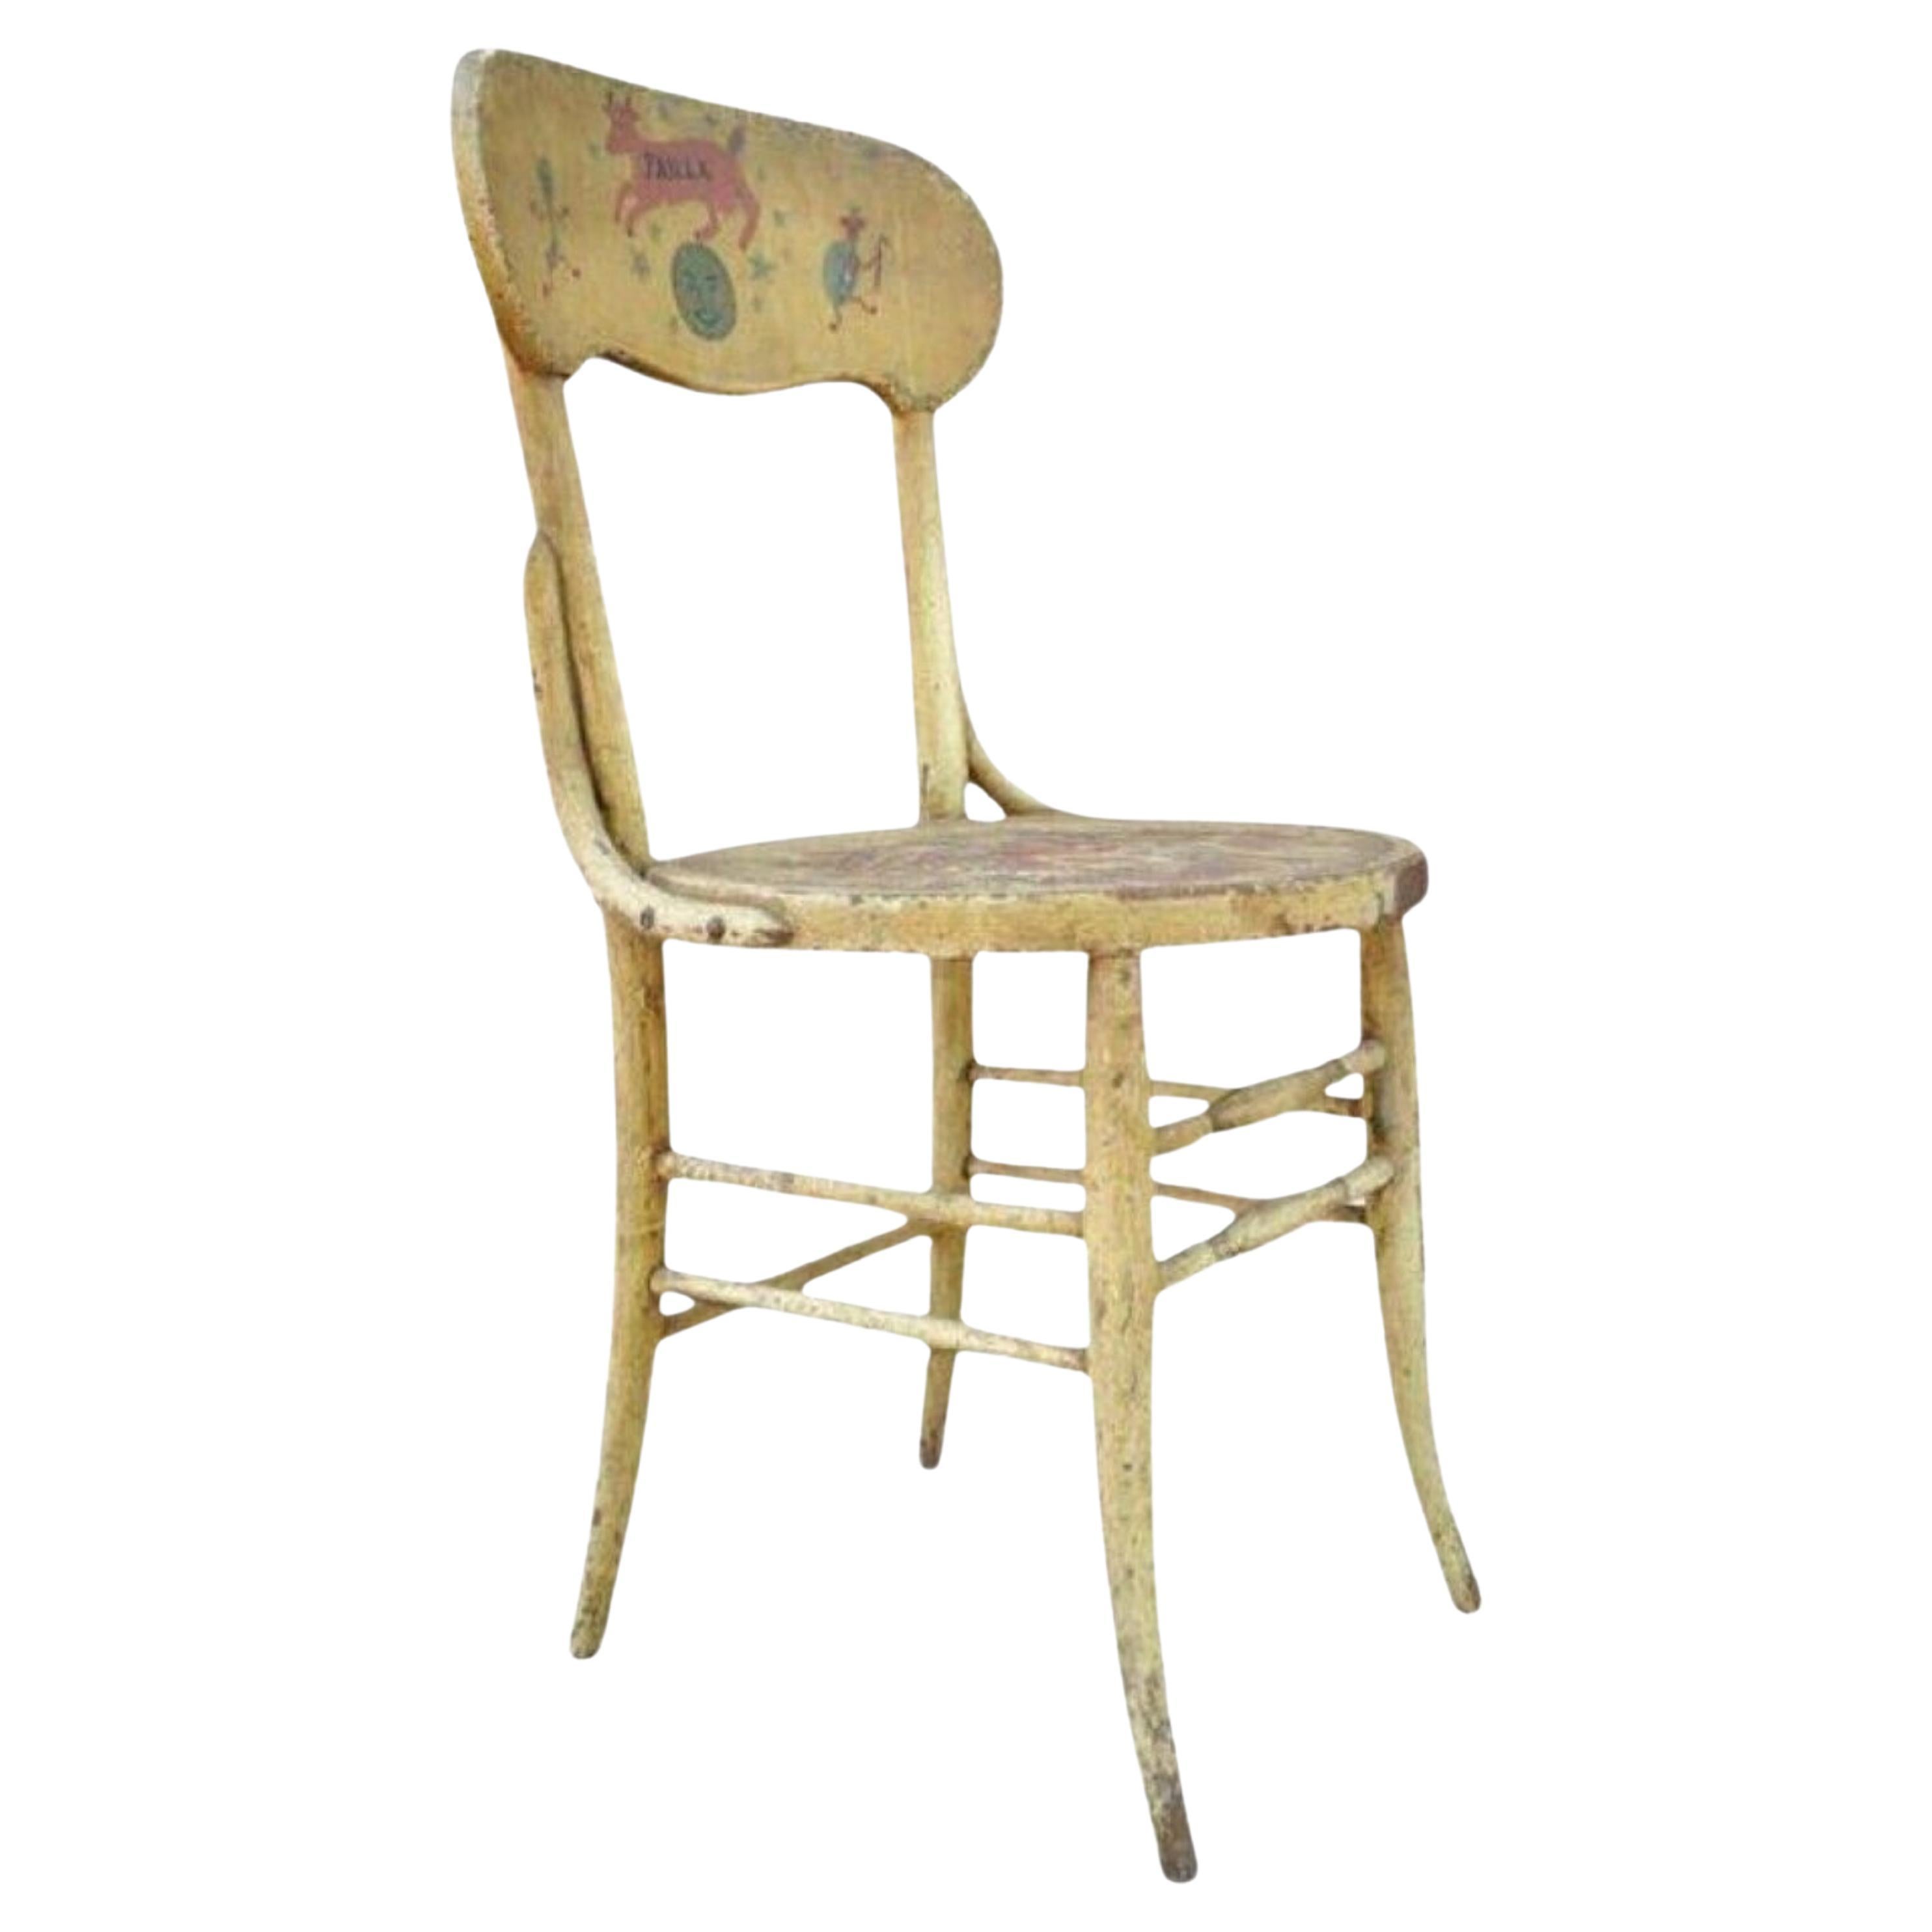 Antique Rustic Primitive Distress Hand Painted Nursery Rhymes Side Accent Chair For Sale